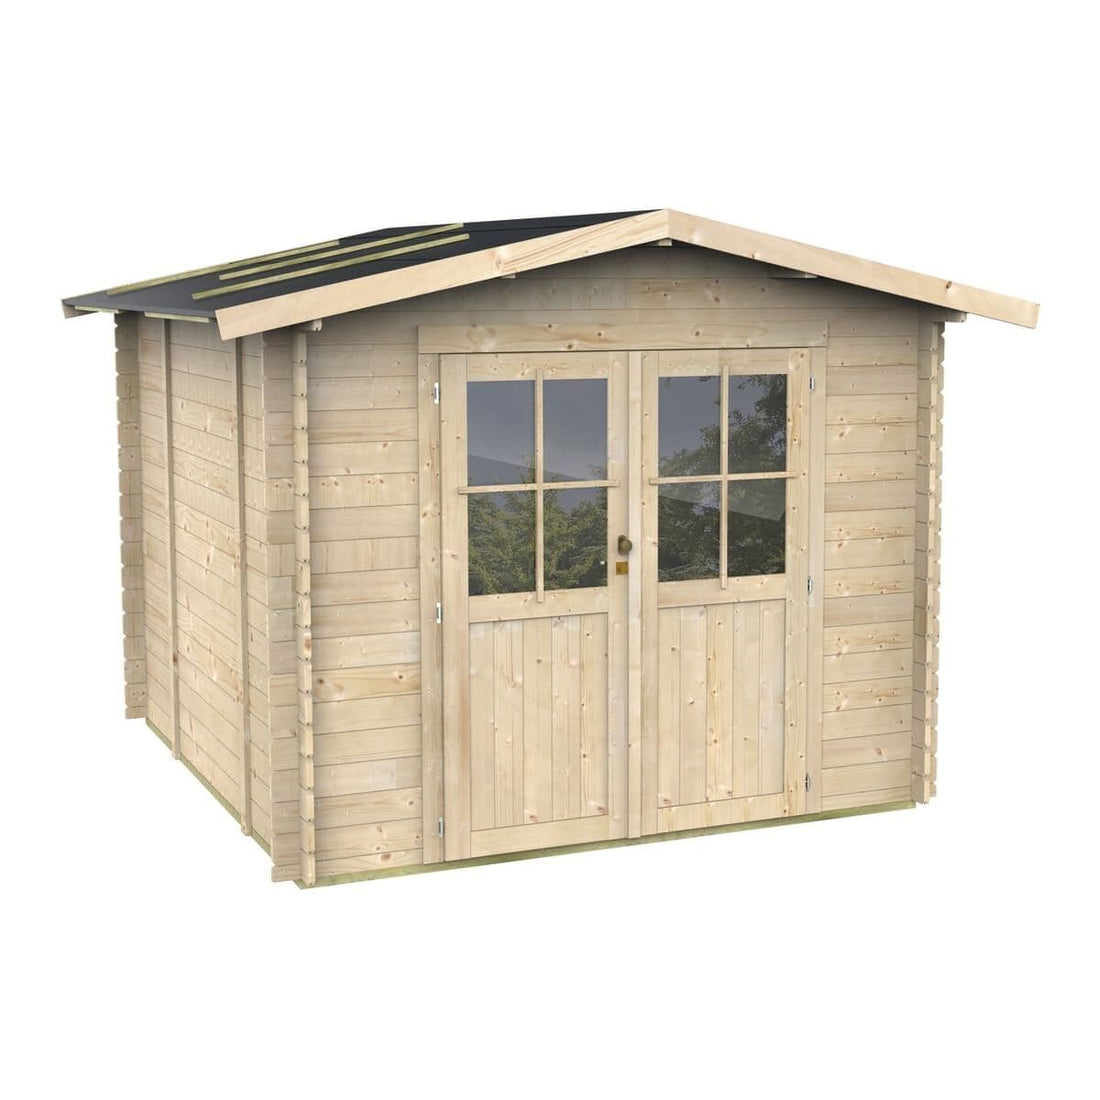 LORY WOODEN HOUSE 25 MM THICK EXTERNAL DIMENSIONS 276X254X218 WITH FLOOR INCLUDED